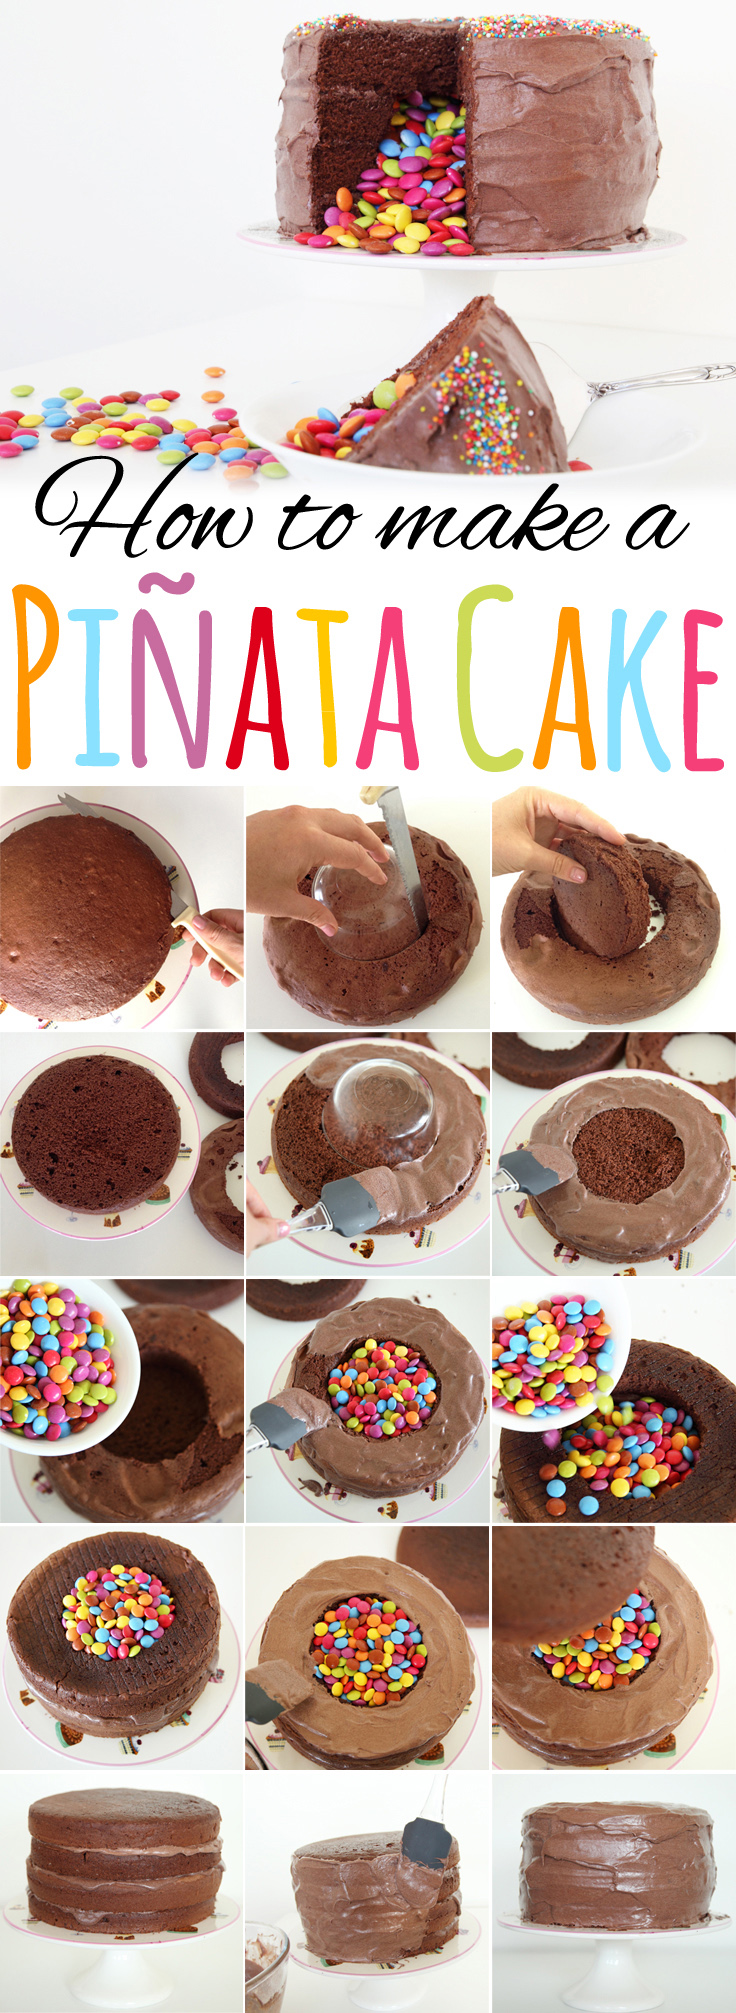 How to make a Piñata cake - Easy step-by-step instructions for a festive ‘Alexander’ inspired dessert! #pinata #pinatacake